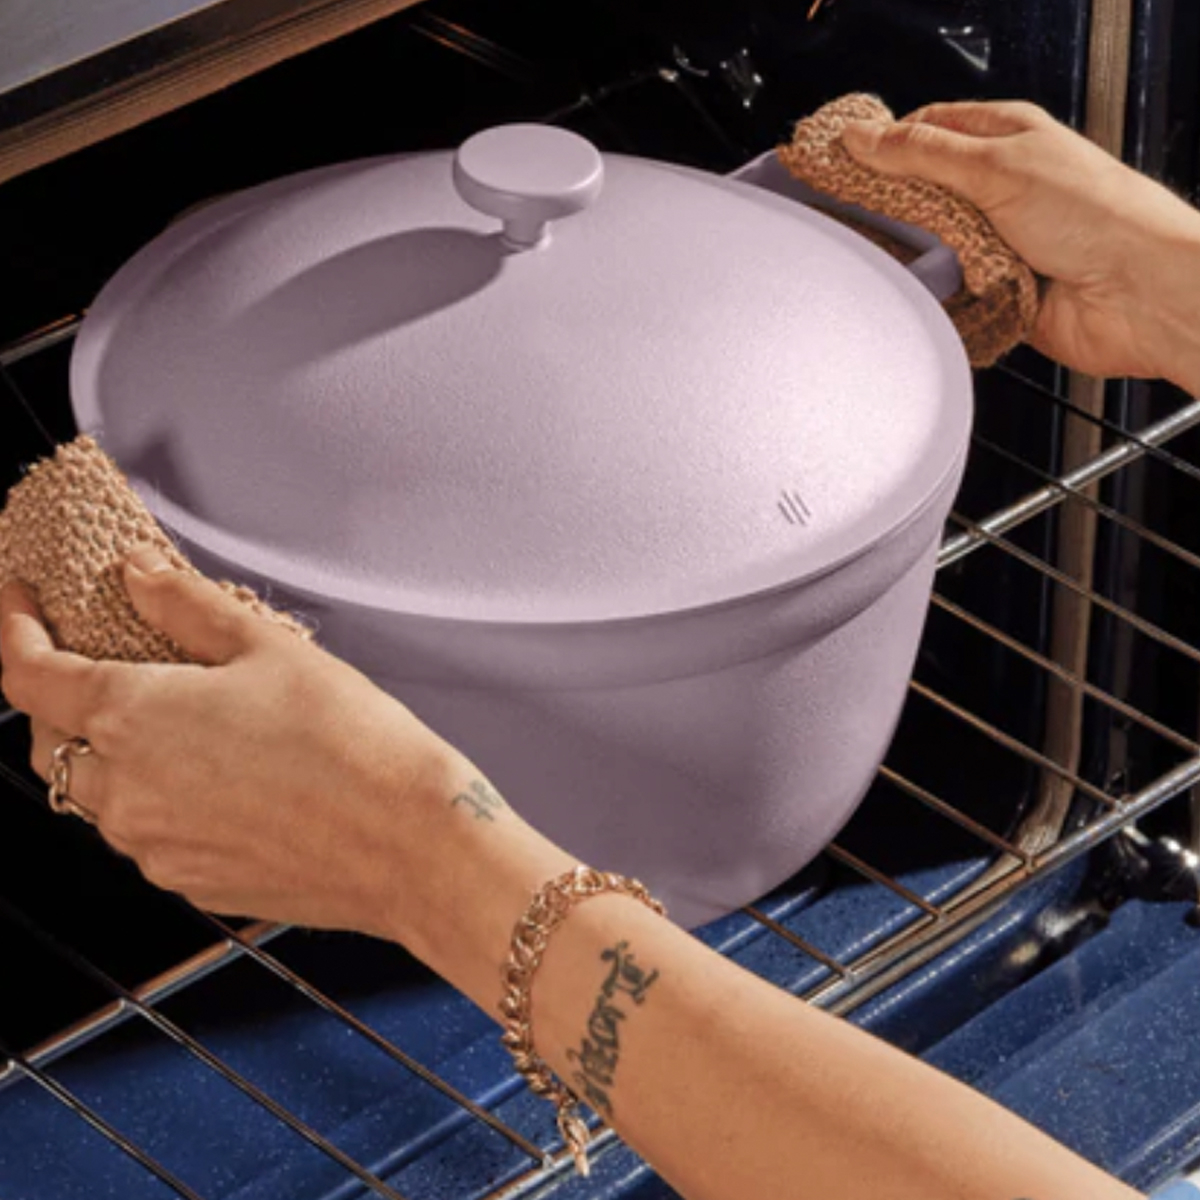 Our Place Sale: Save 20% On Always Pan & These 14 Kitchen Must-Haves